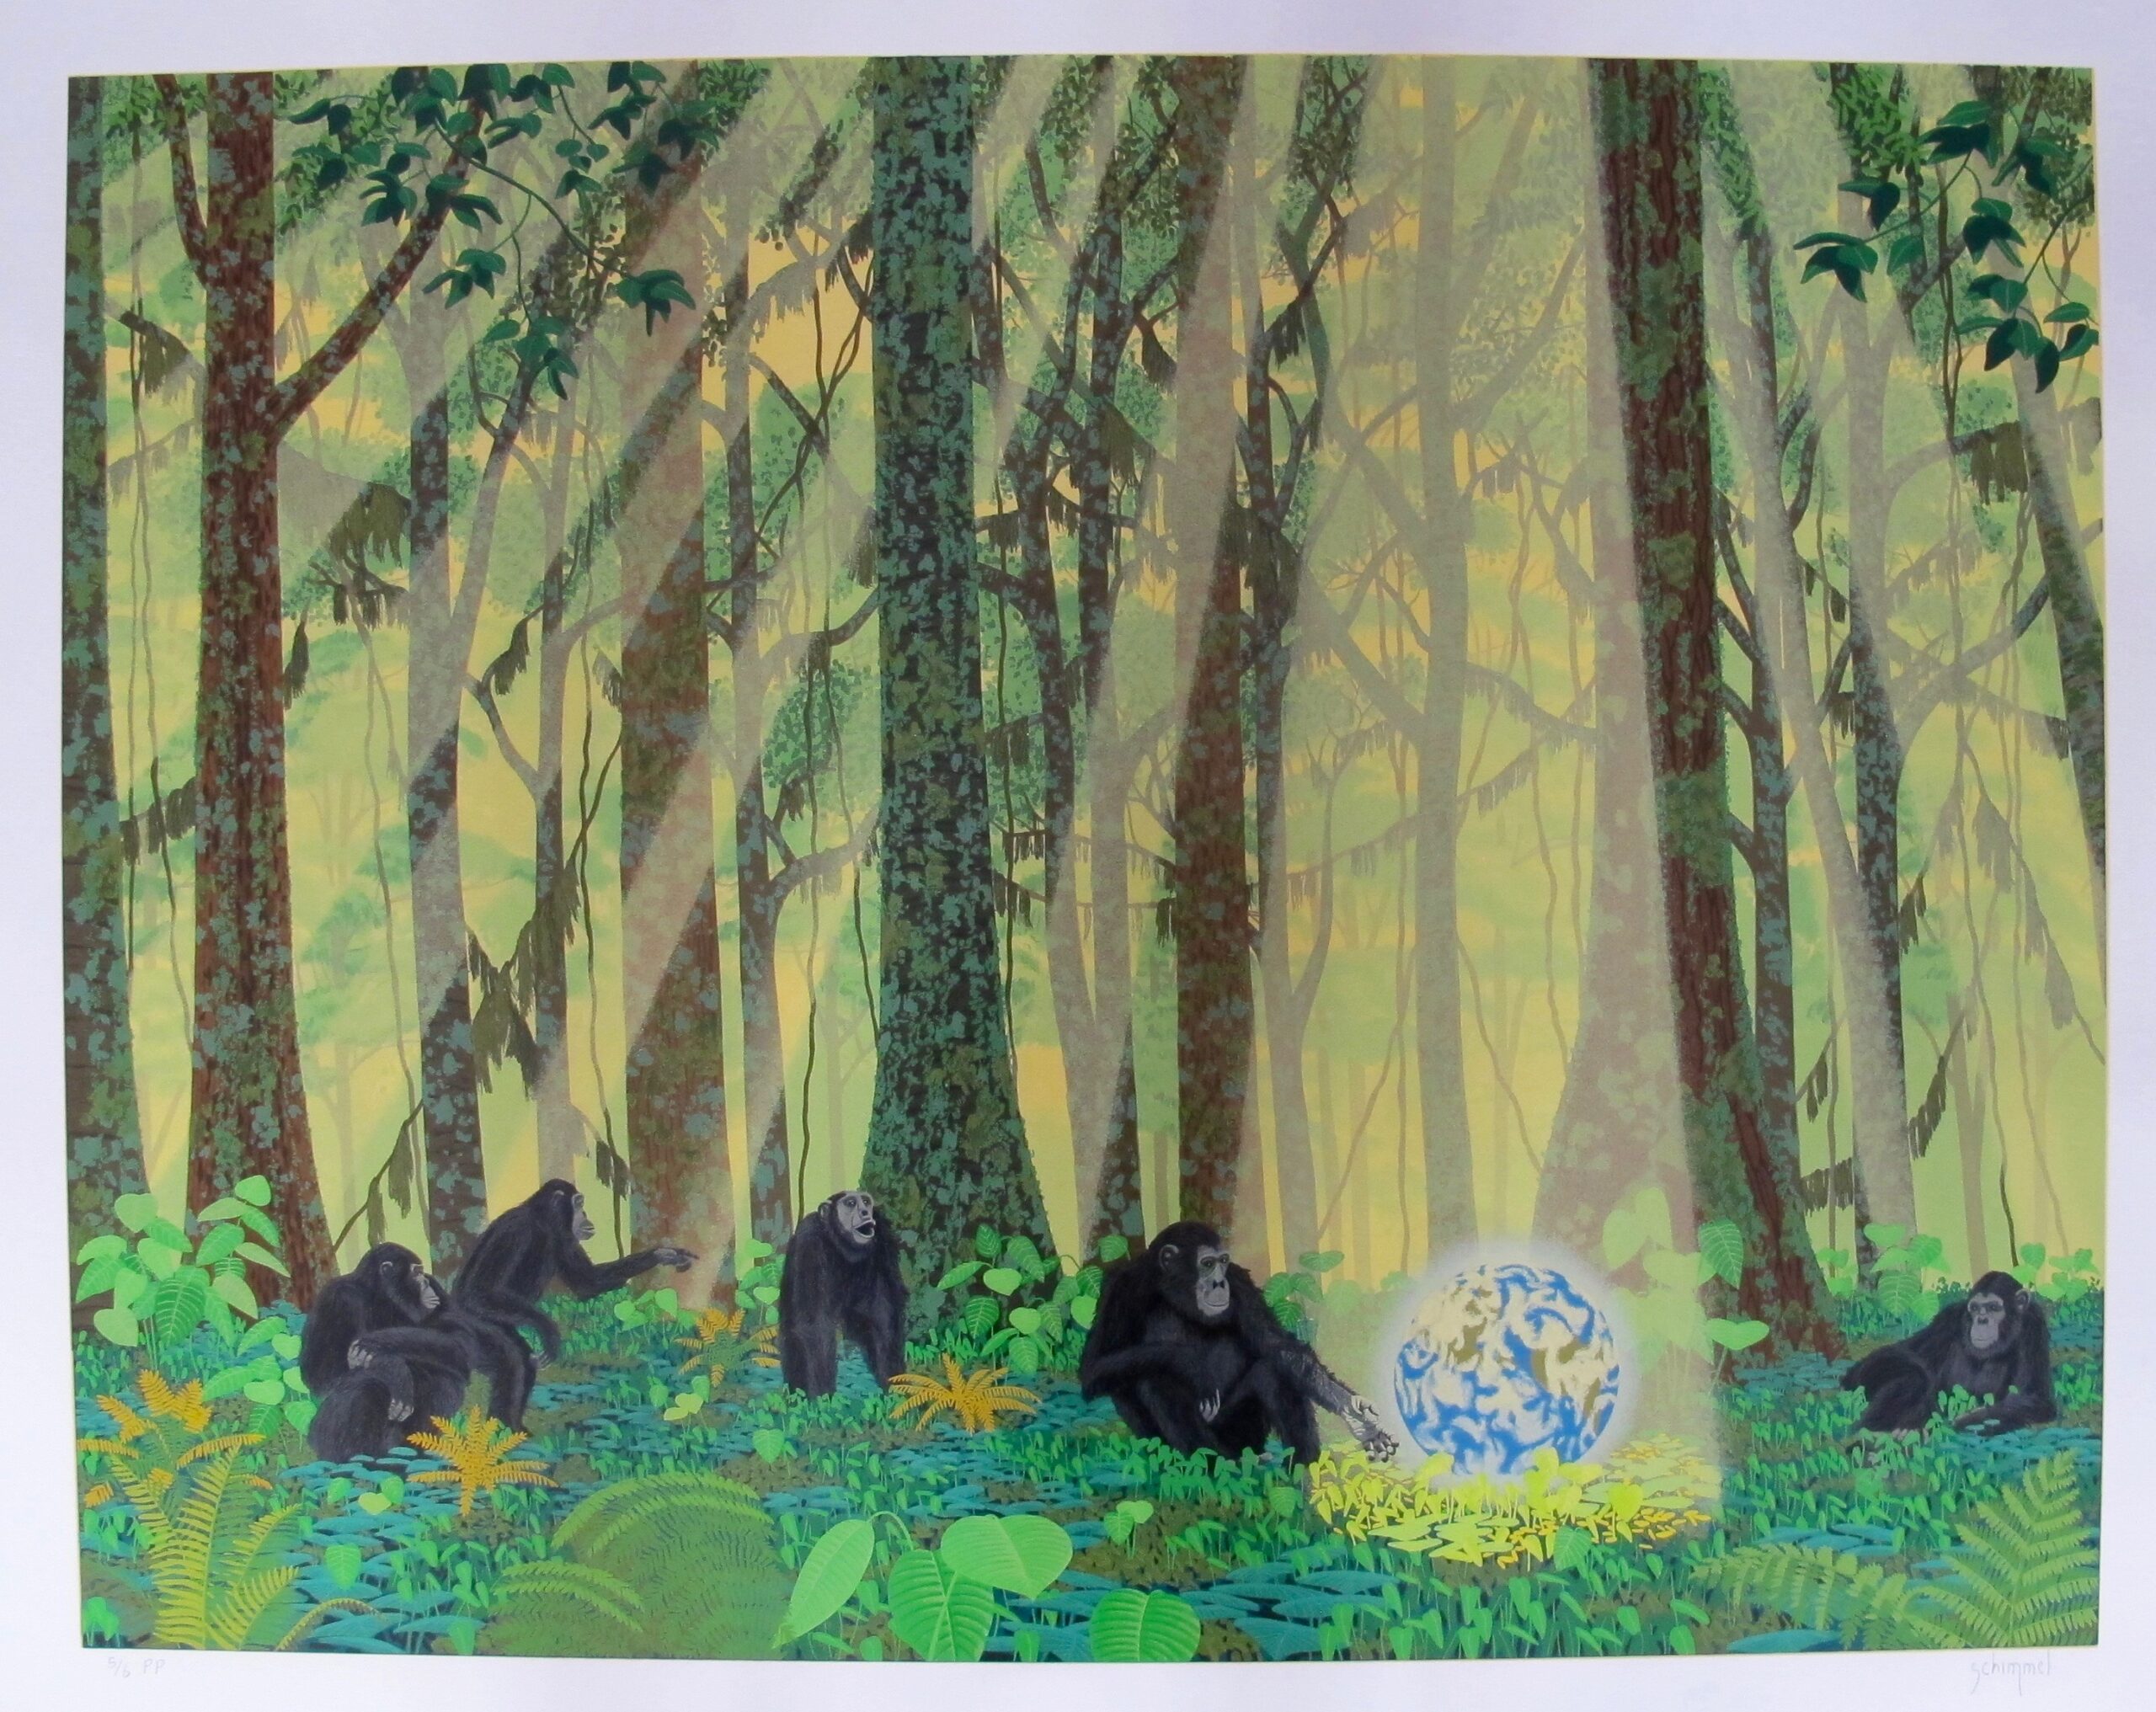 WILLIAM SCHIMMEL CHIMPS EARTH Hand Signed Serigraph CHIMPANZEE